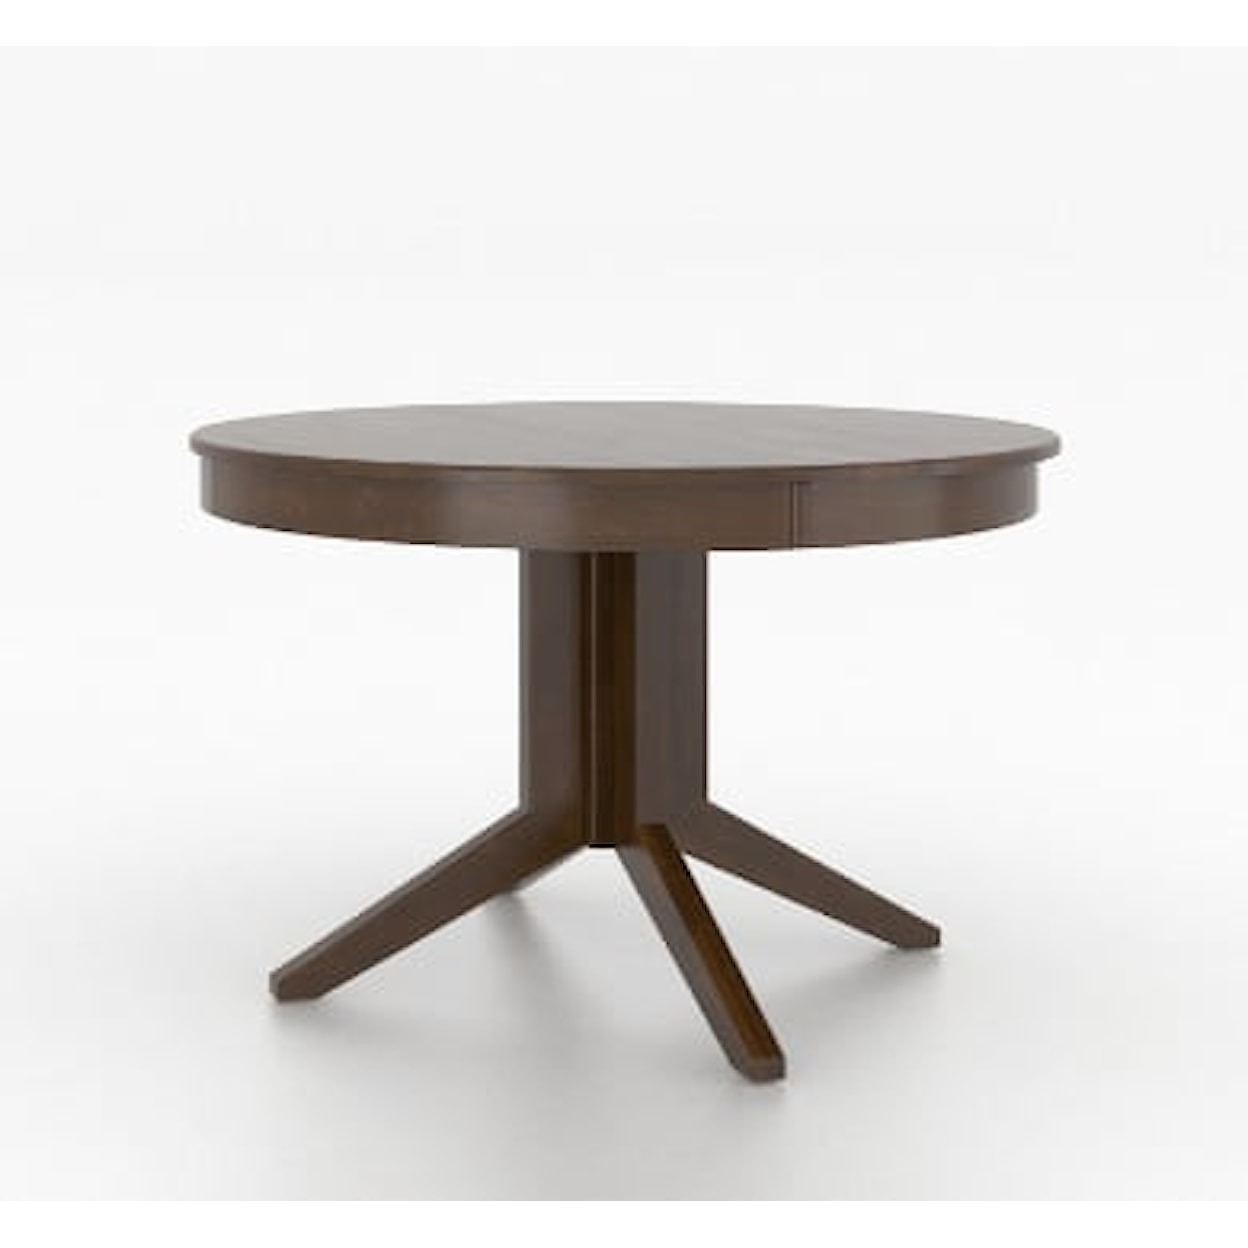 Canadel Canadel Round Wood Table